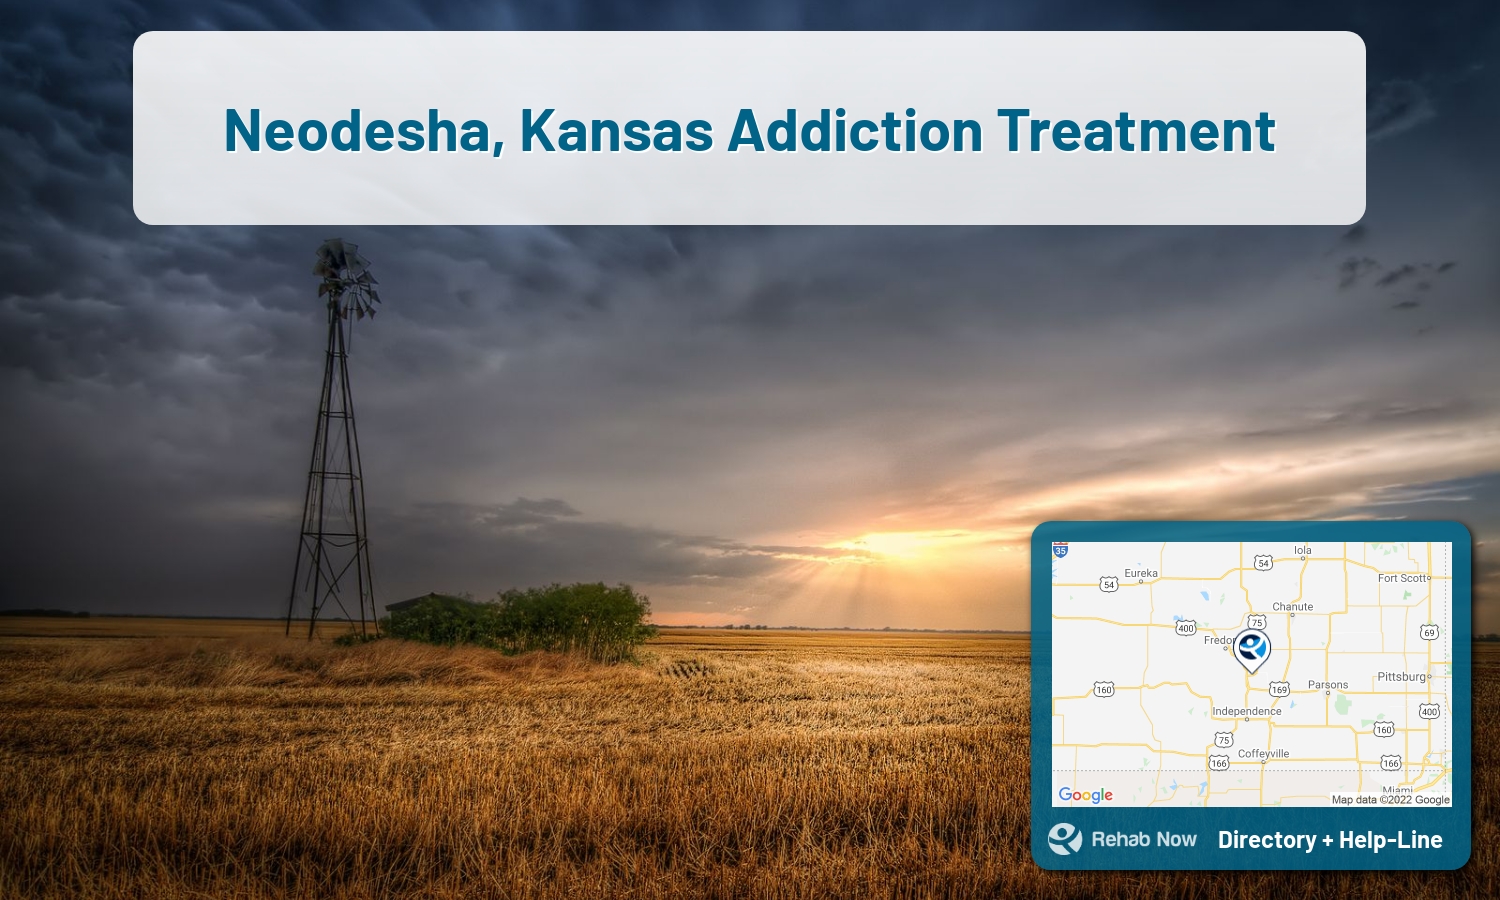 List of alcohol and drug treatment centers near you in Neodesha, Kansas. Research certifications, programs, methods, pricing, and more.